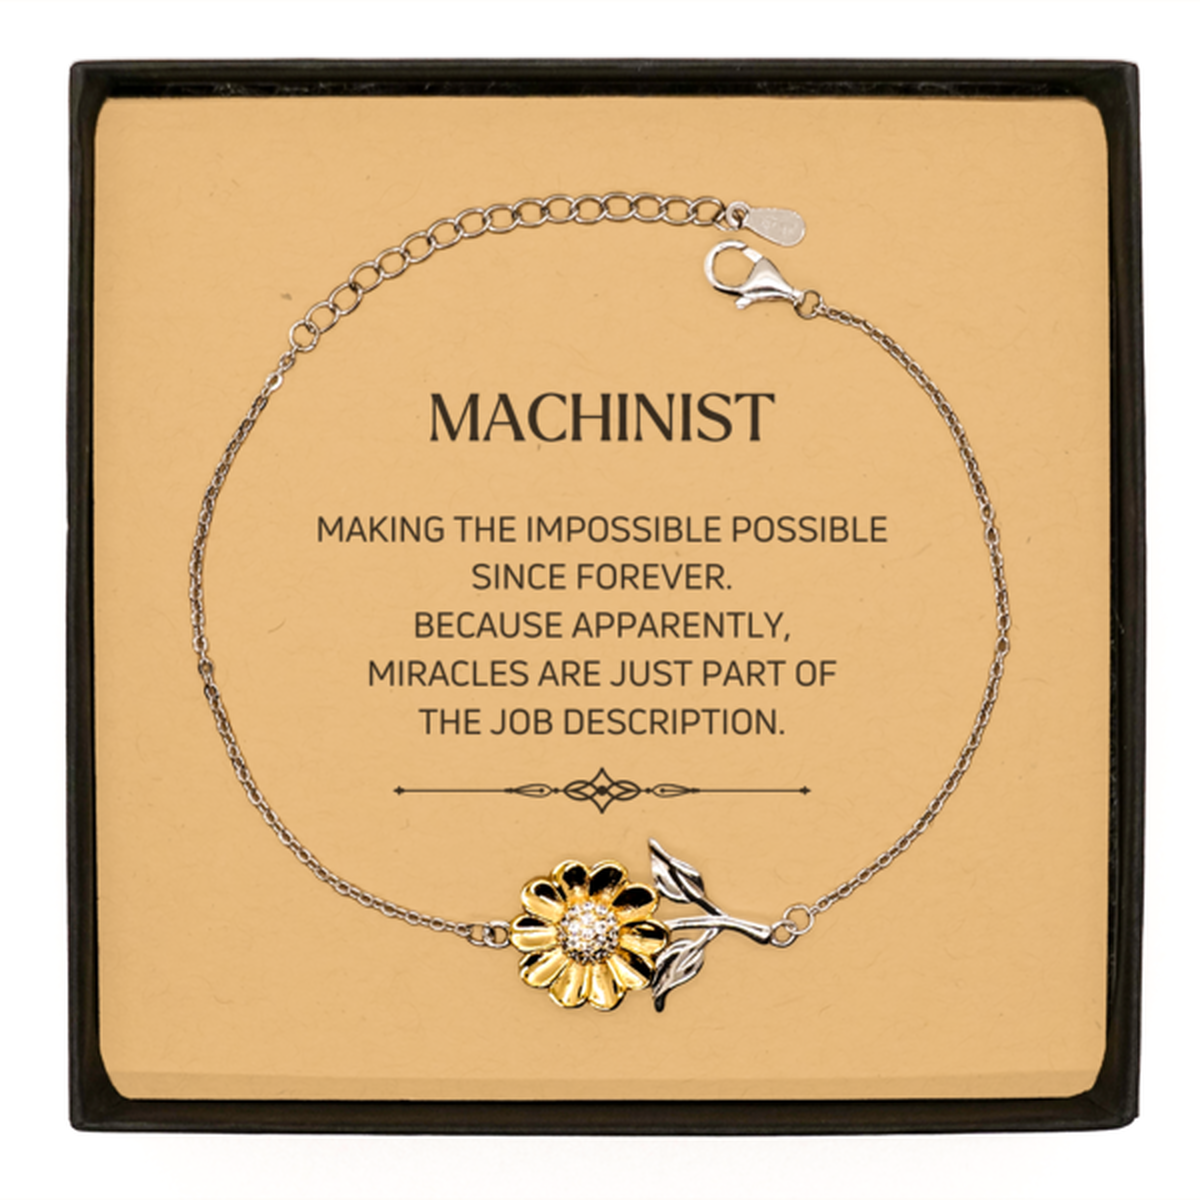 Funny Machinist Gifts, Miracles are just part of the job description, Inspirational Birthday Sunflower Bracelet For Machinist, Men, Women, Coworkers, Friends, Boss